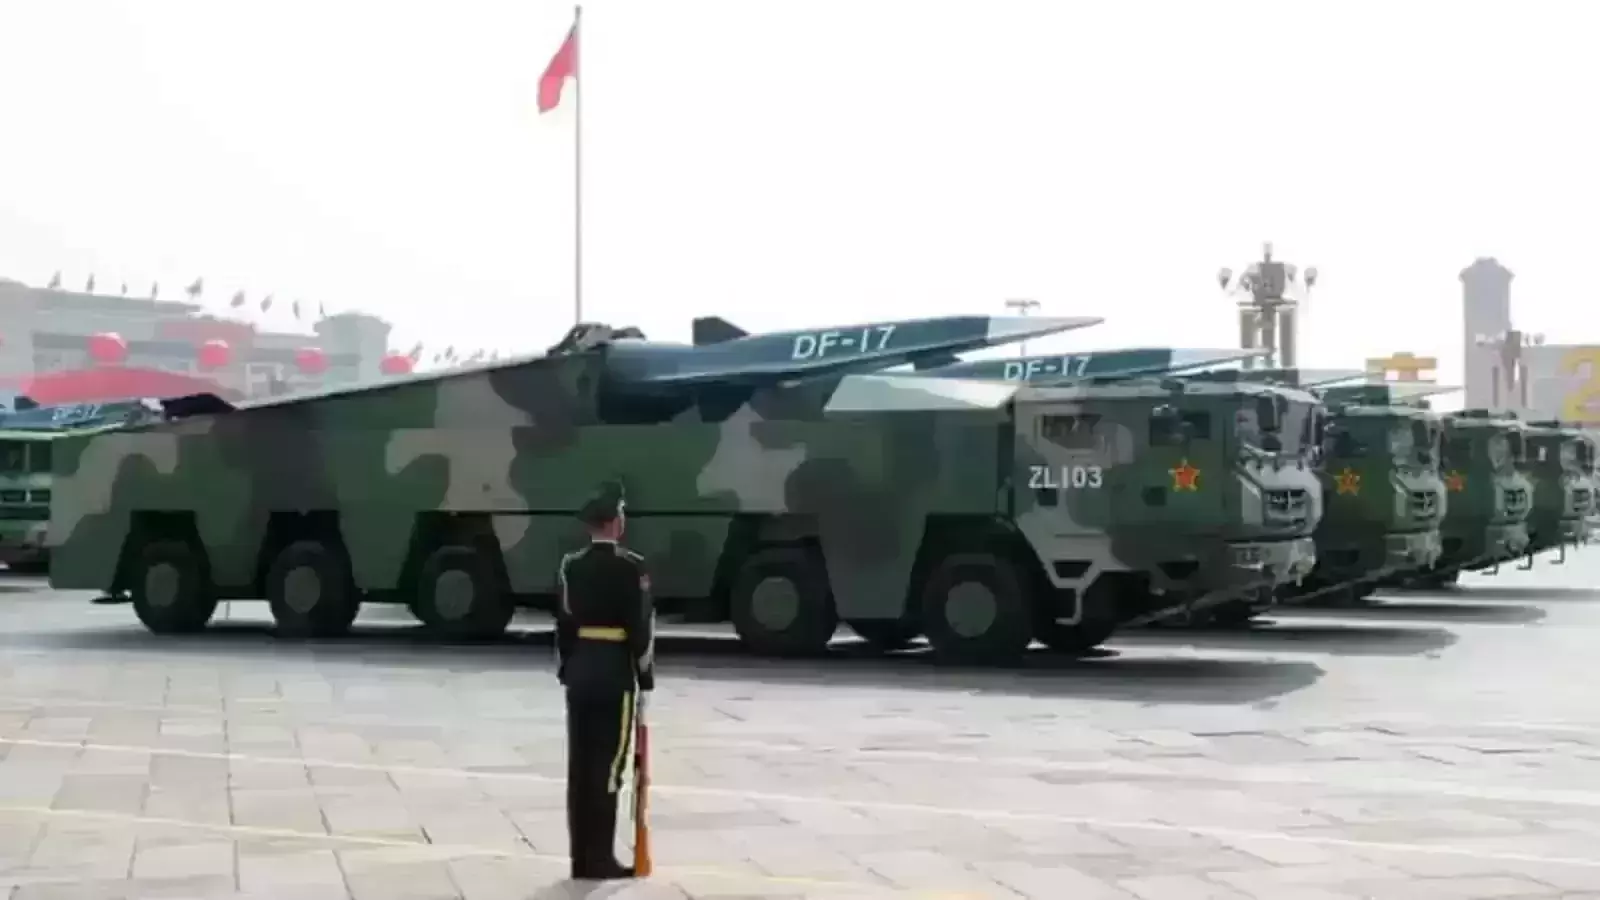 China has over 500 operational nuclear warheads: Pentagon report